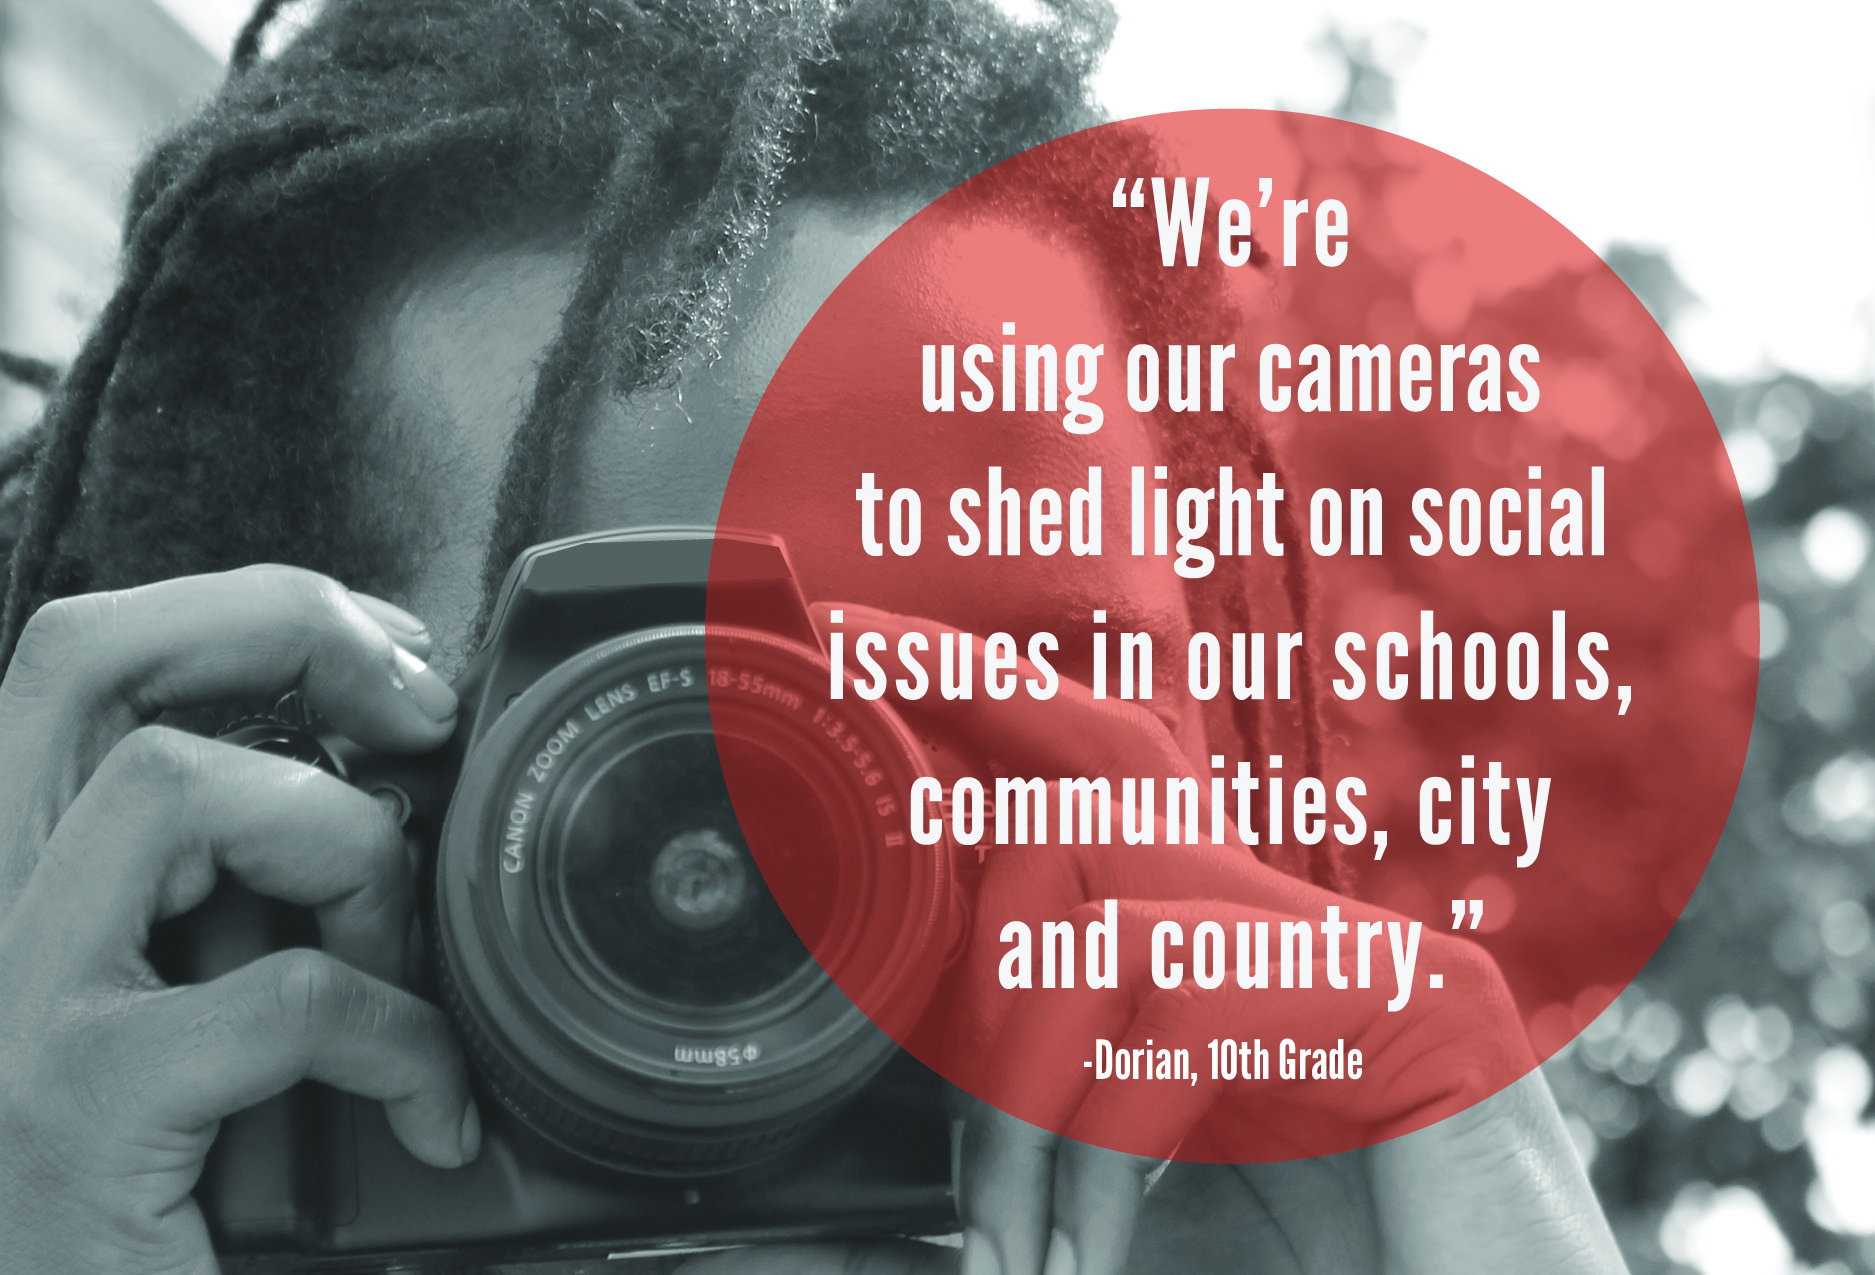 "We're using our cameras to shed light on issues in our schools, communities, city and country." -Dorian, 10th Grade